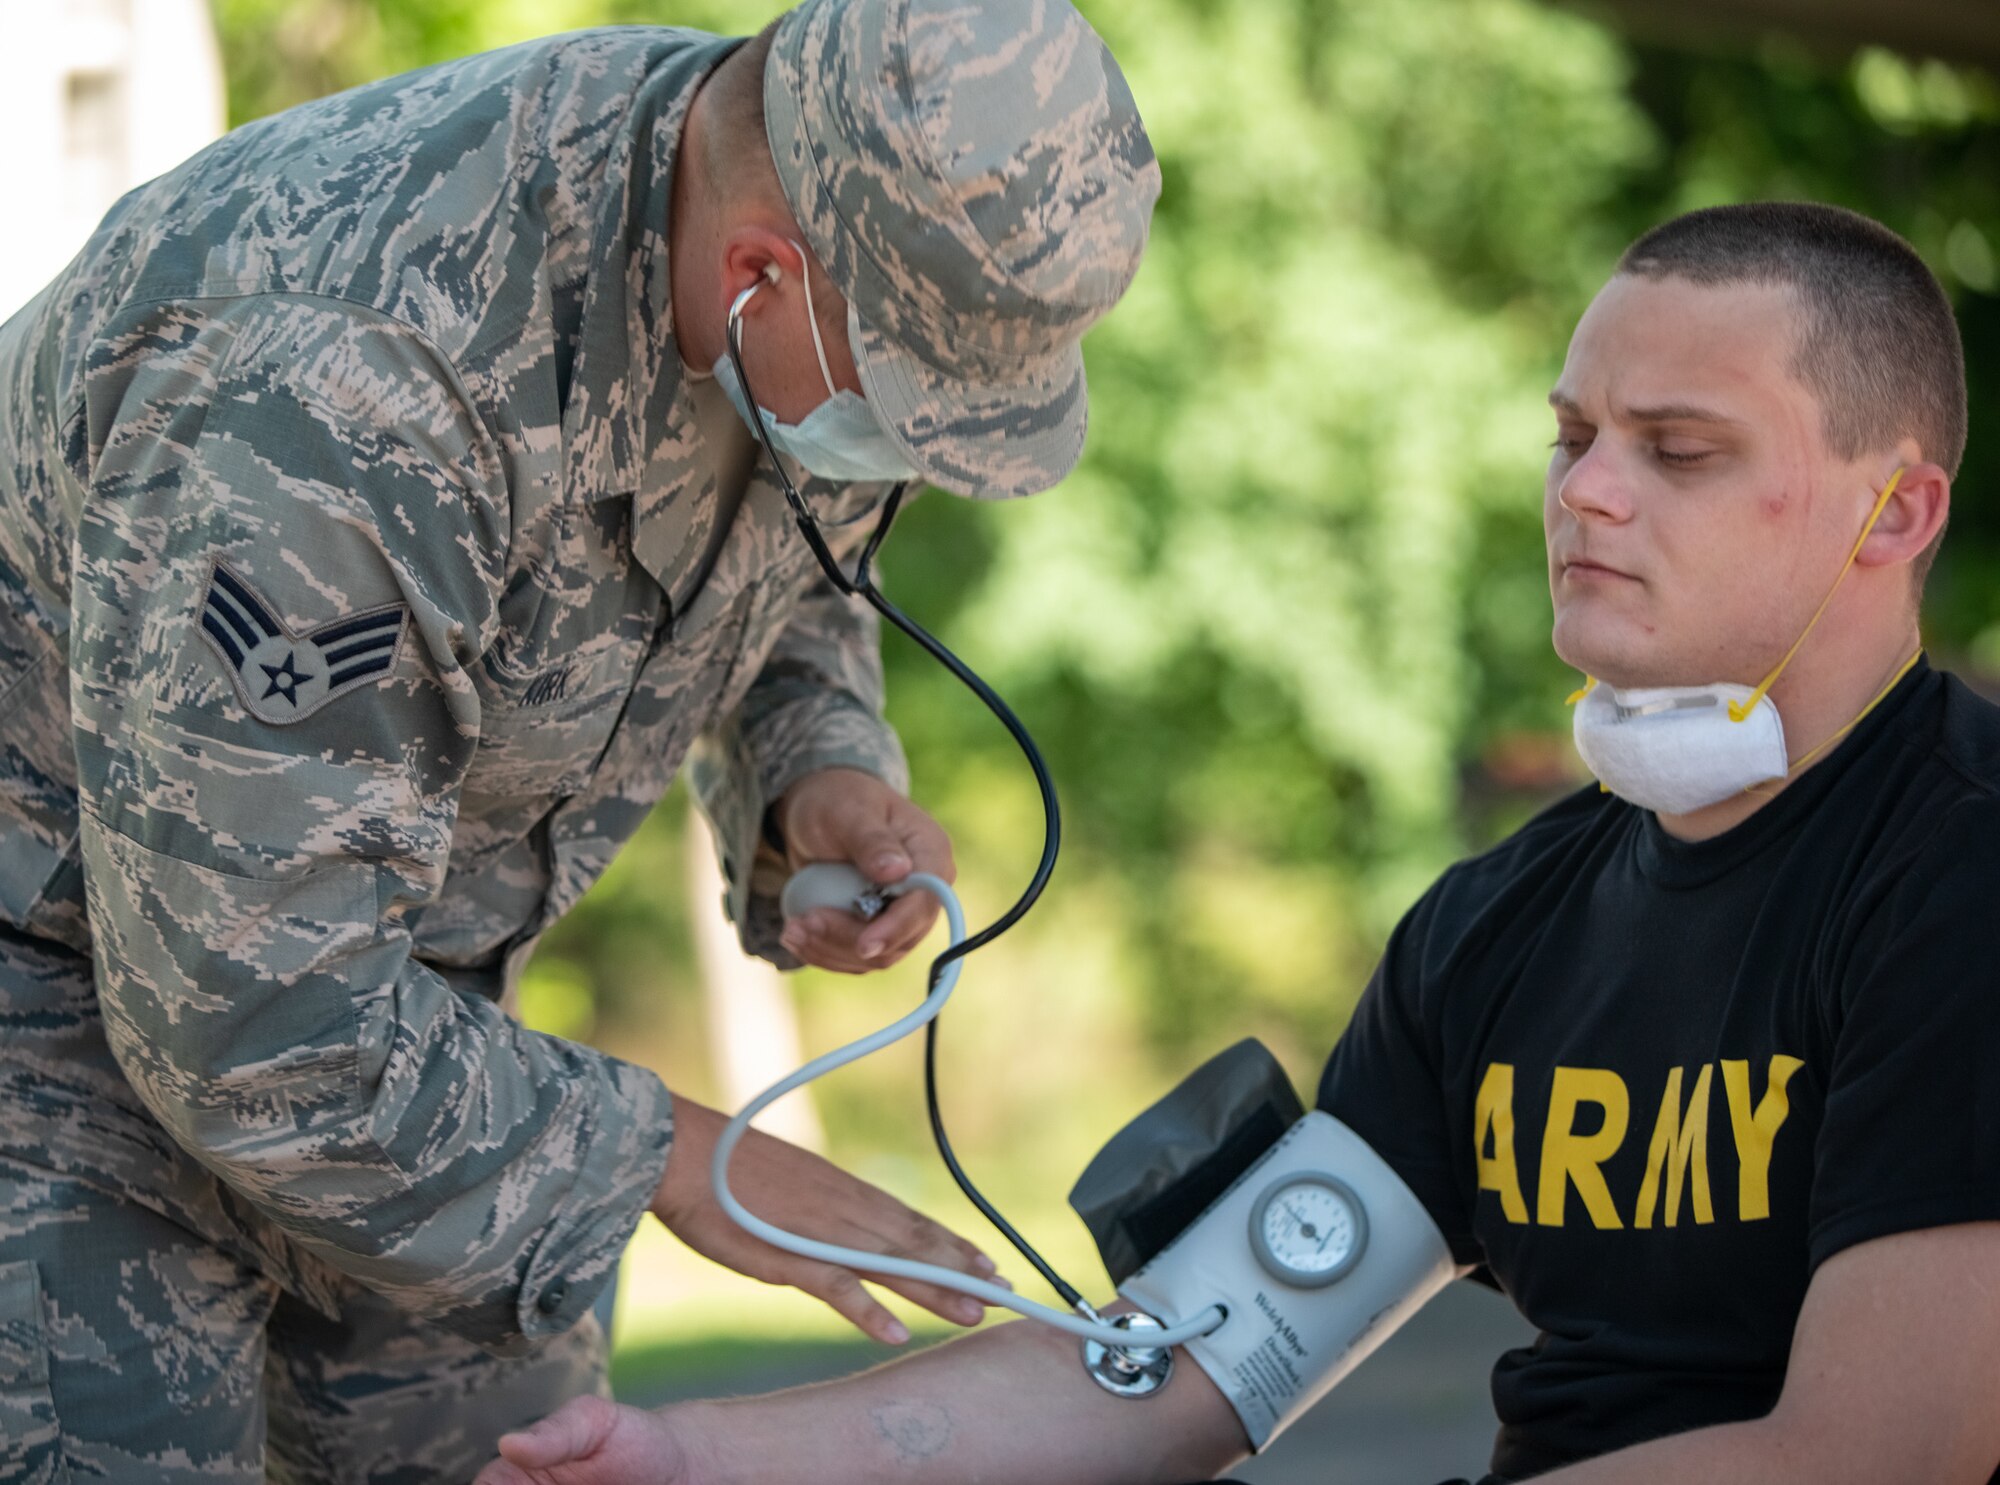 Senior Airman Tristan Kirk, a medic for Team 3 with Task Force 31, checks the vitals of a disinfection team specialist, May 1, 2020. The vitals of all Task Force 31 disinfection teams are checked before and after all disinfection operations. (Photo by U.S. Army Sgt. Jaccob Hearn)